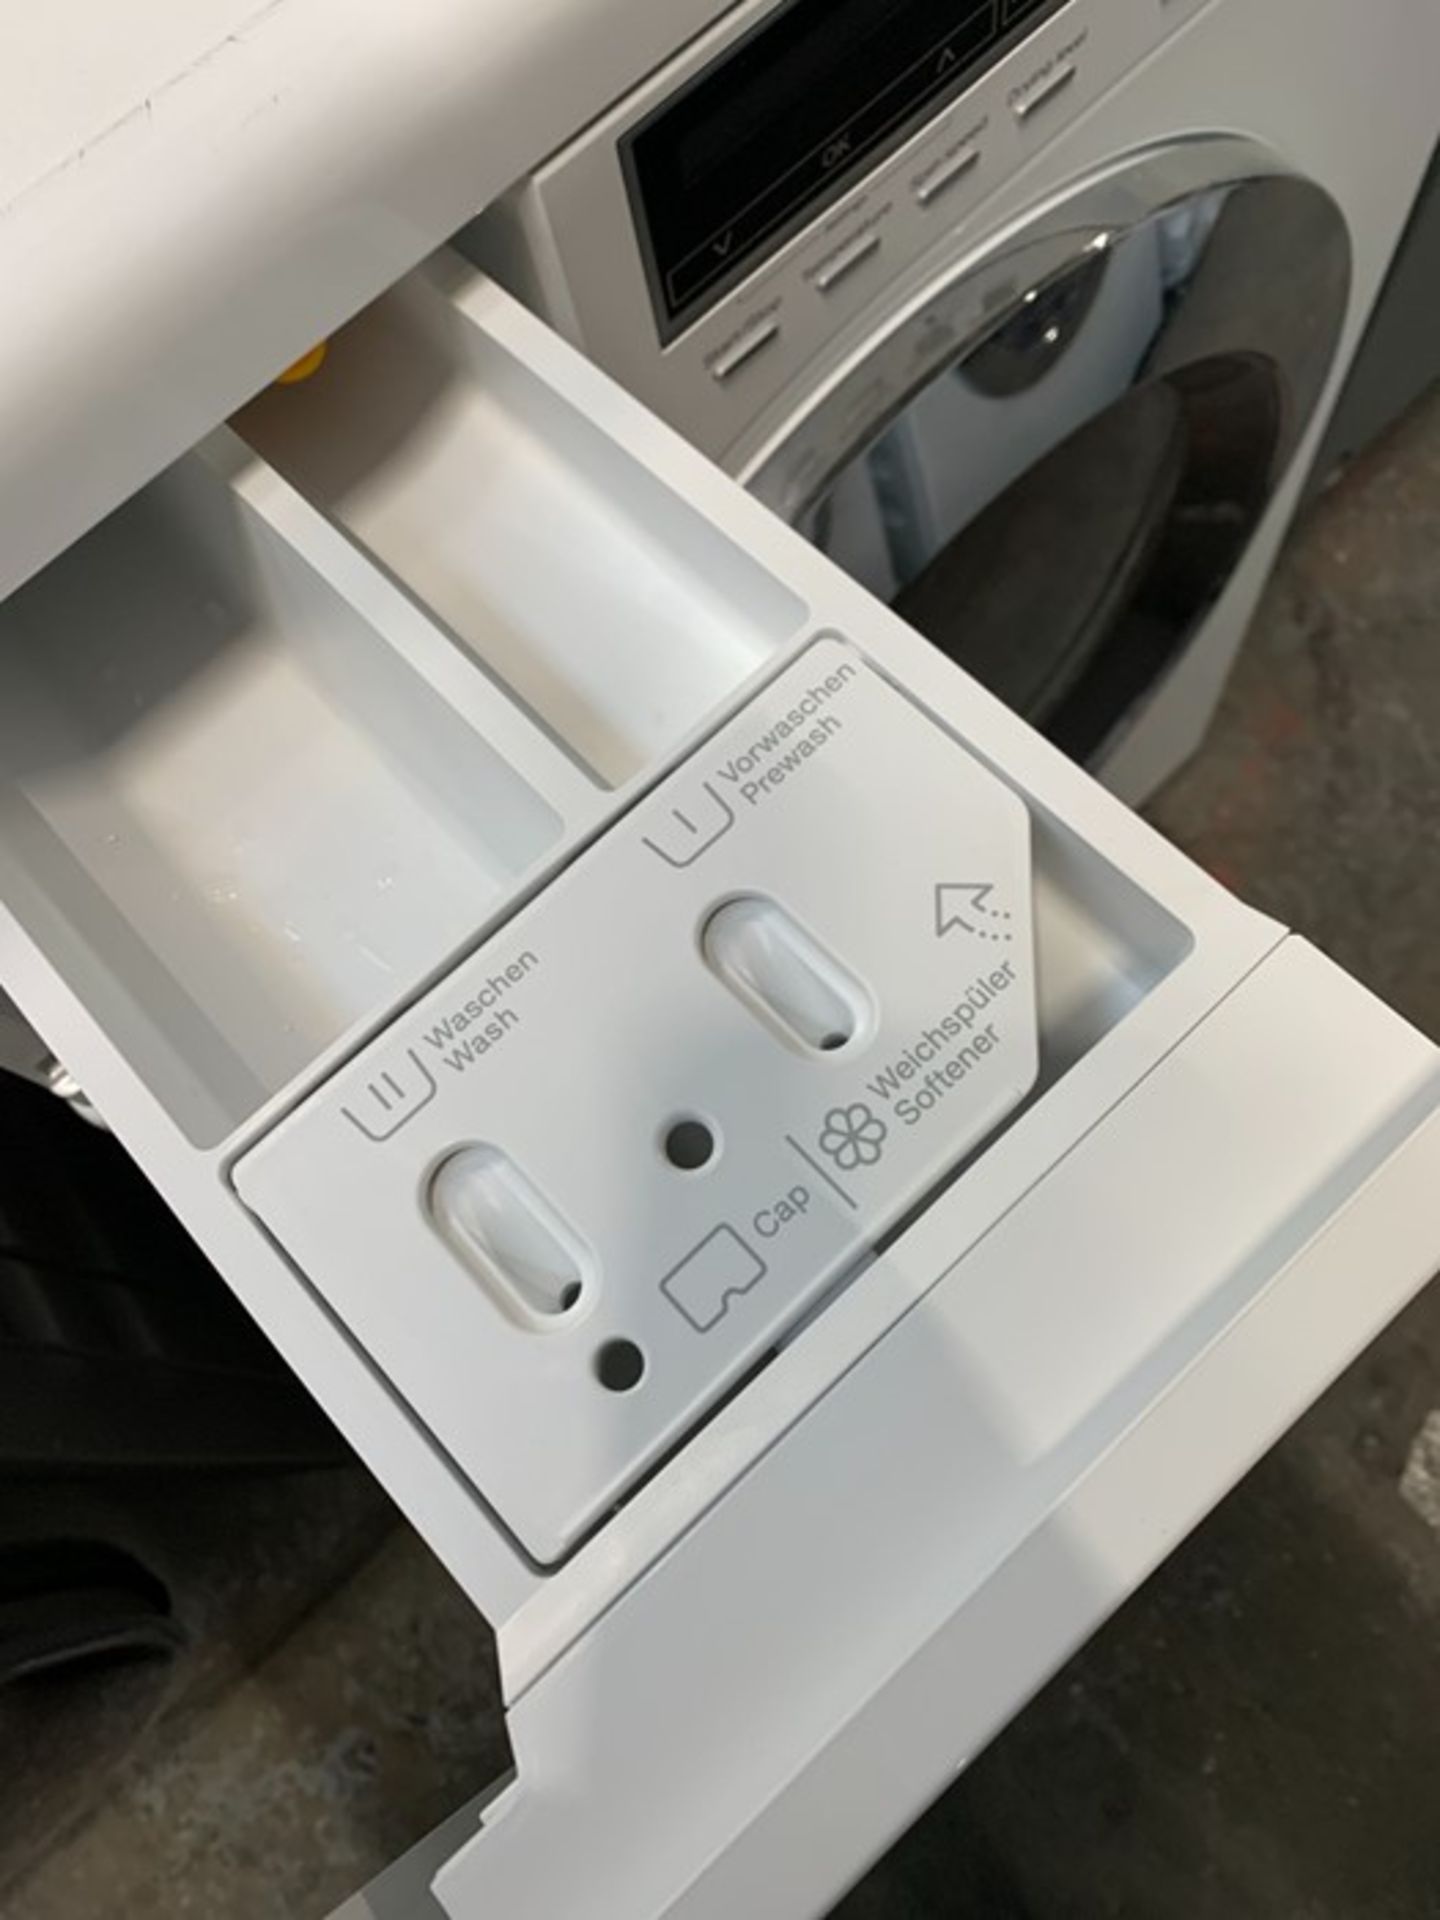 MIELE WTF121WPM WASHER DRYER - Image 2 of 3